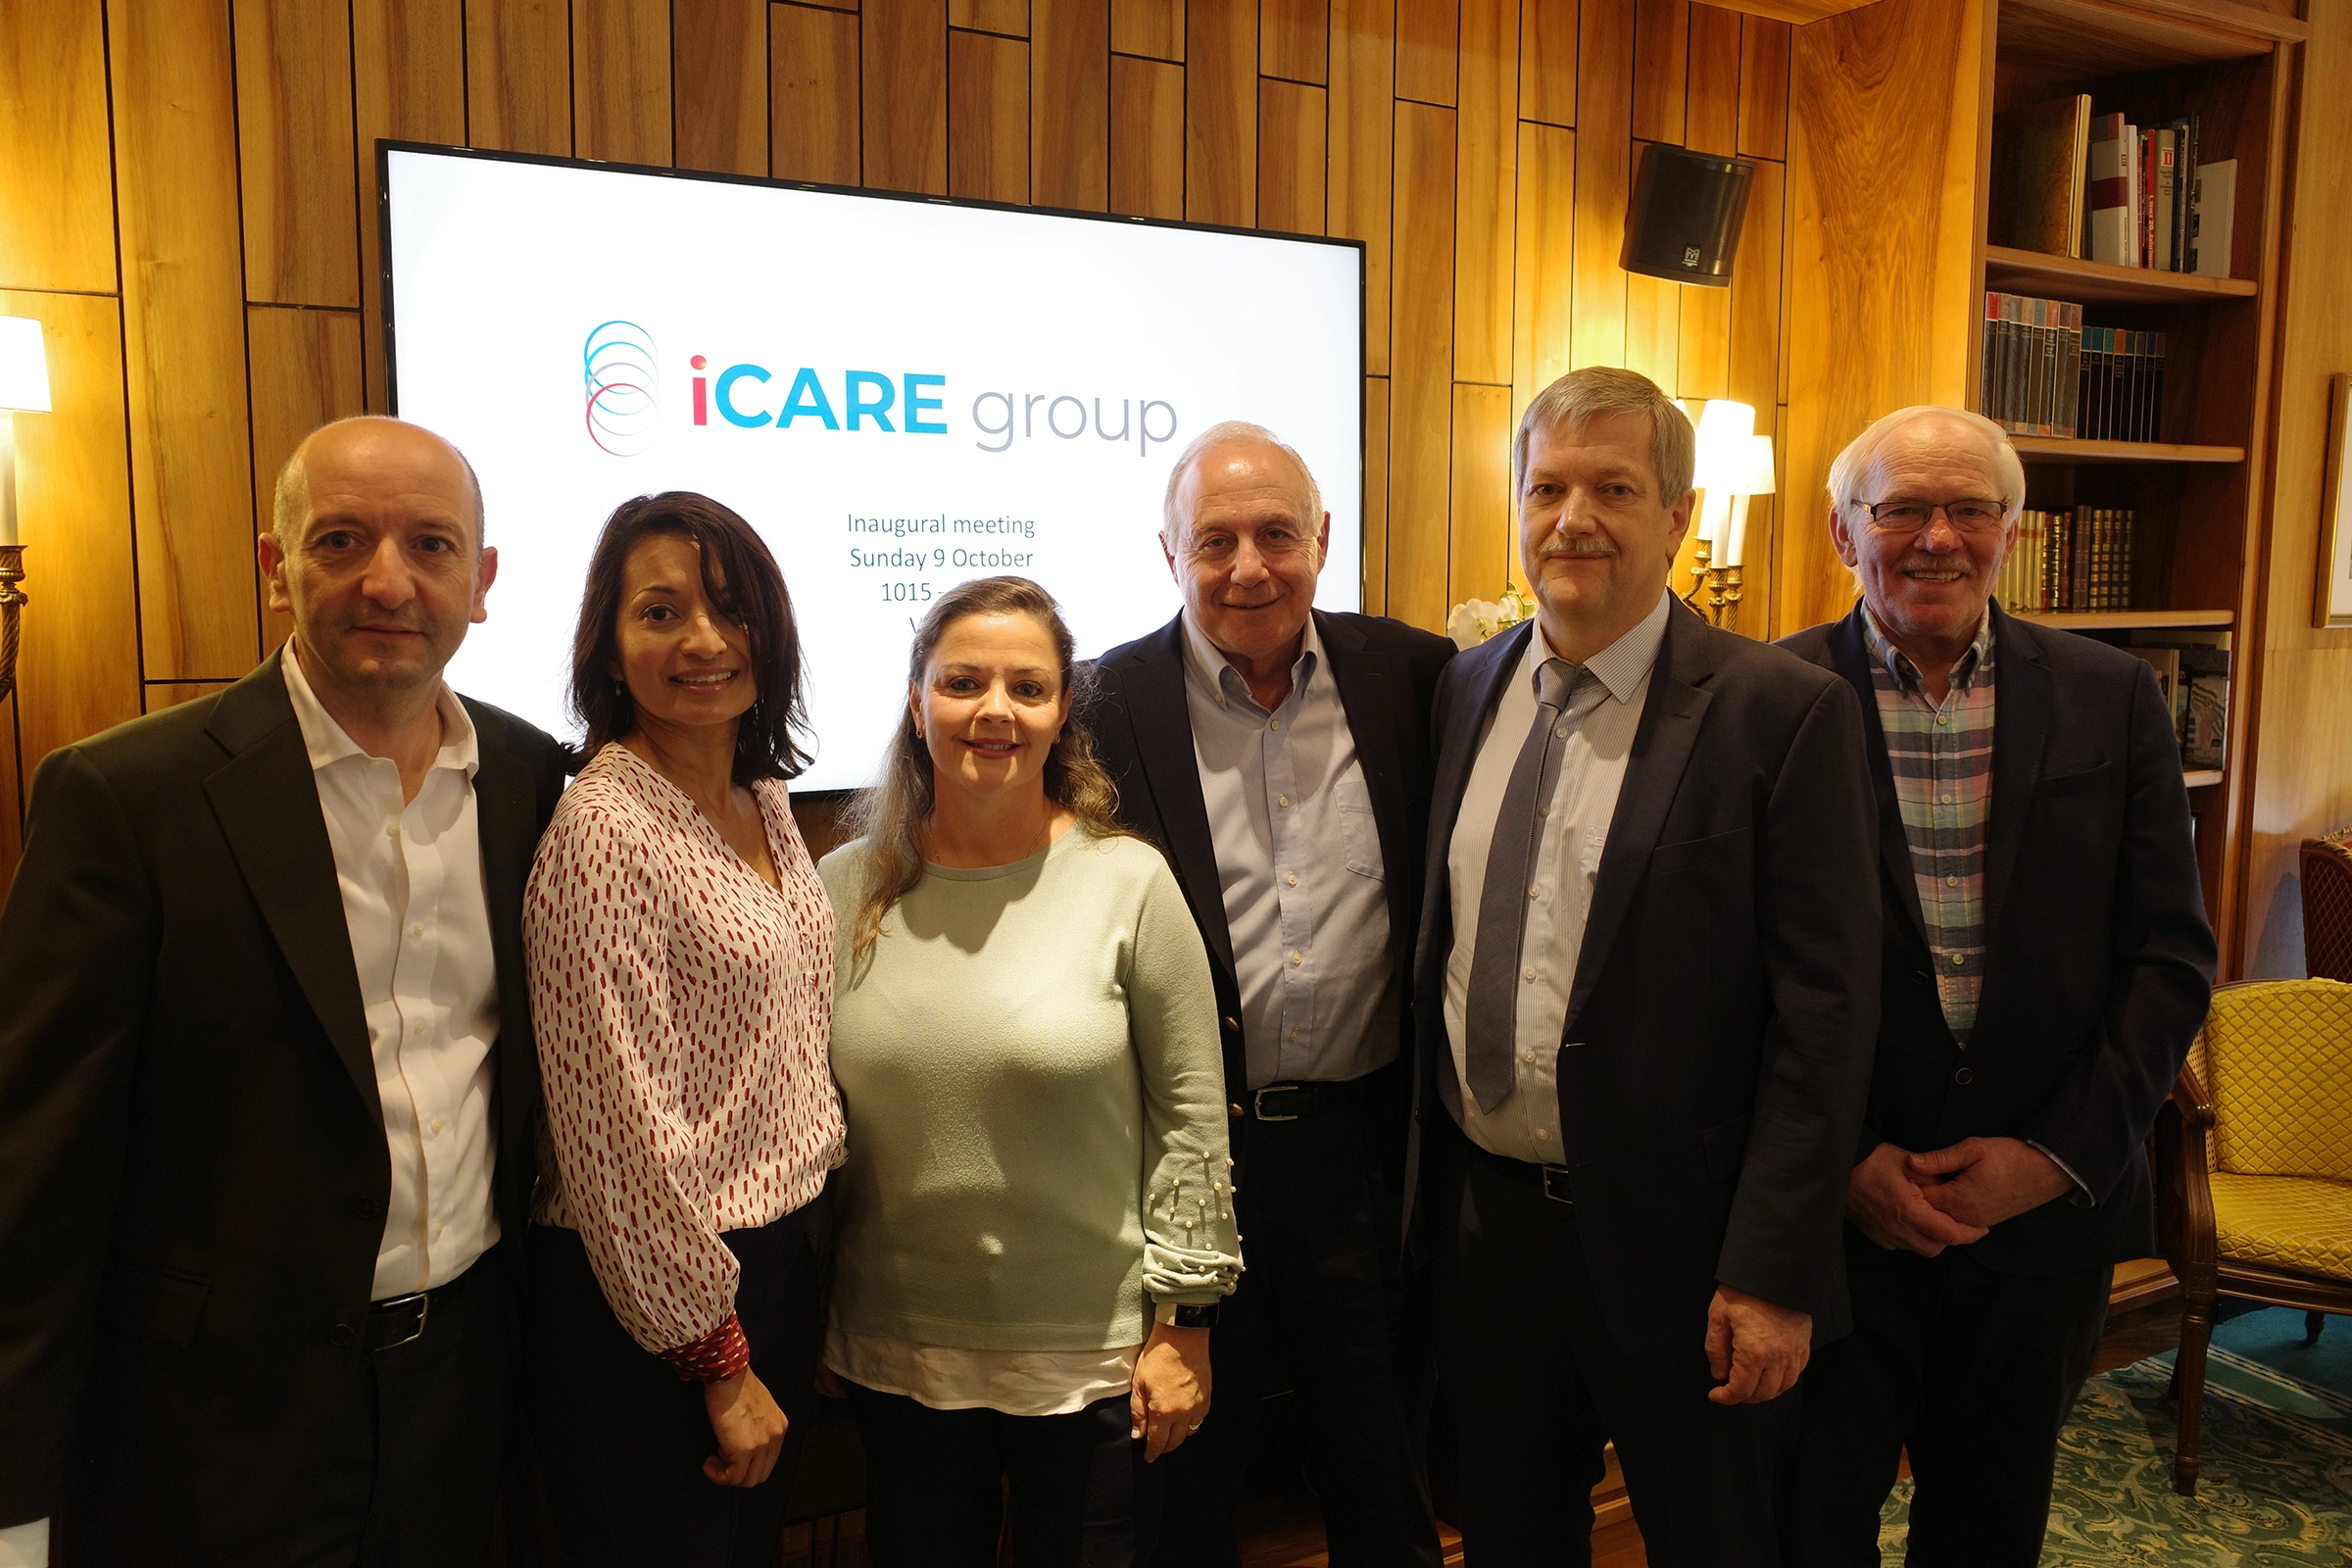 Members of the iCARE Group